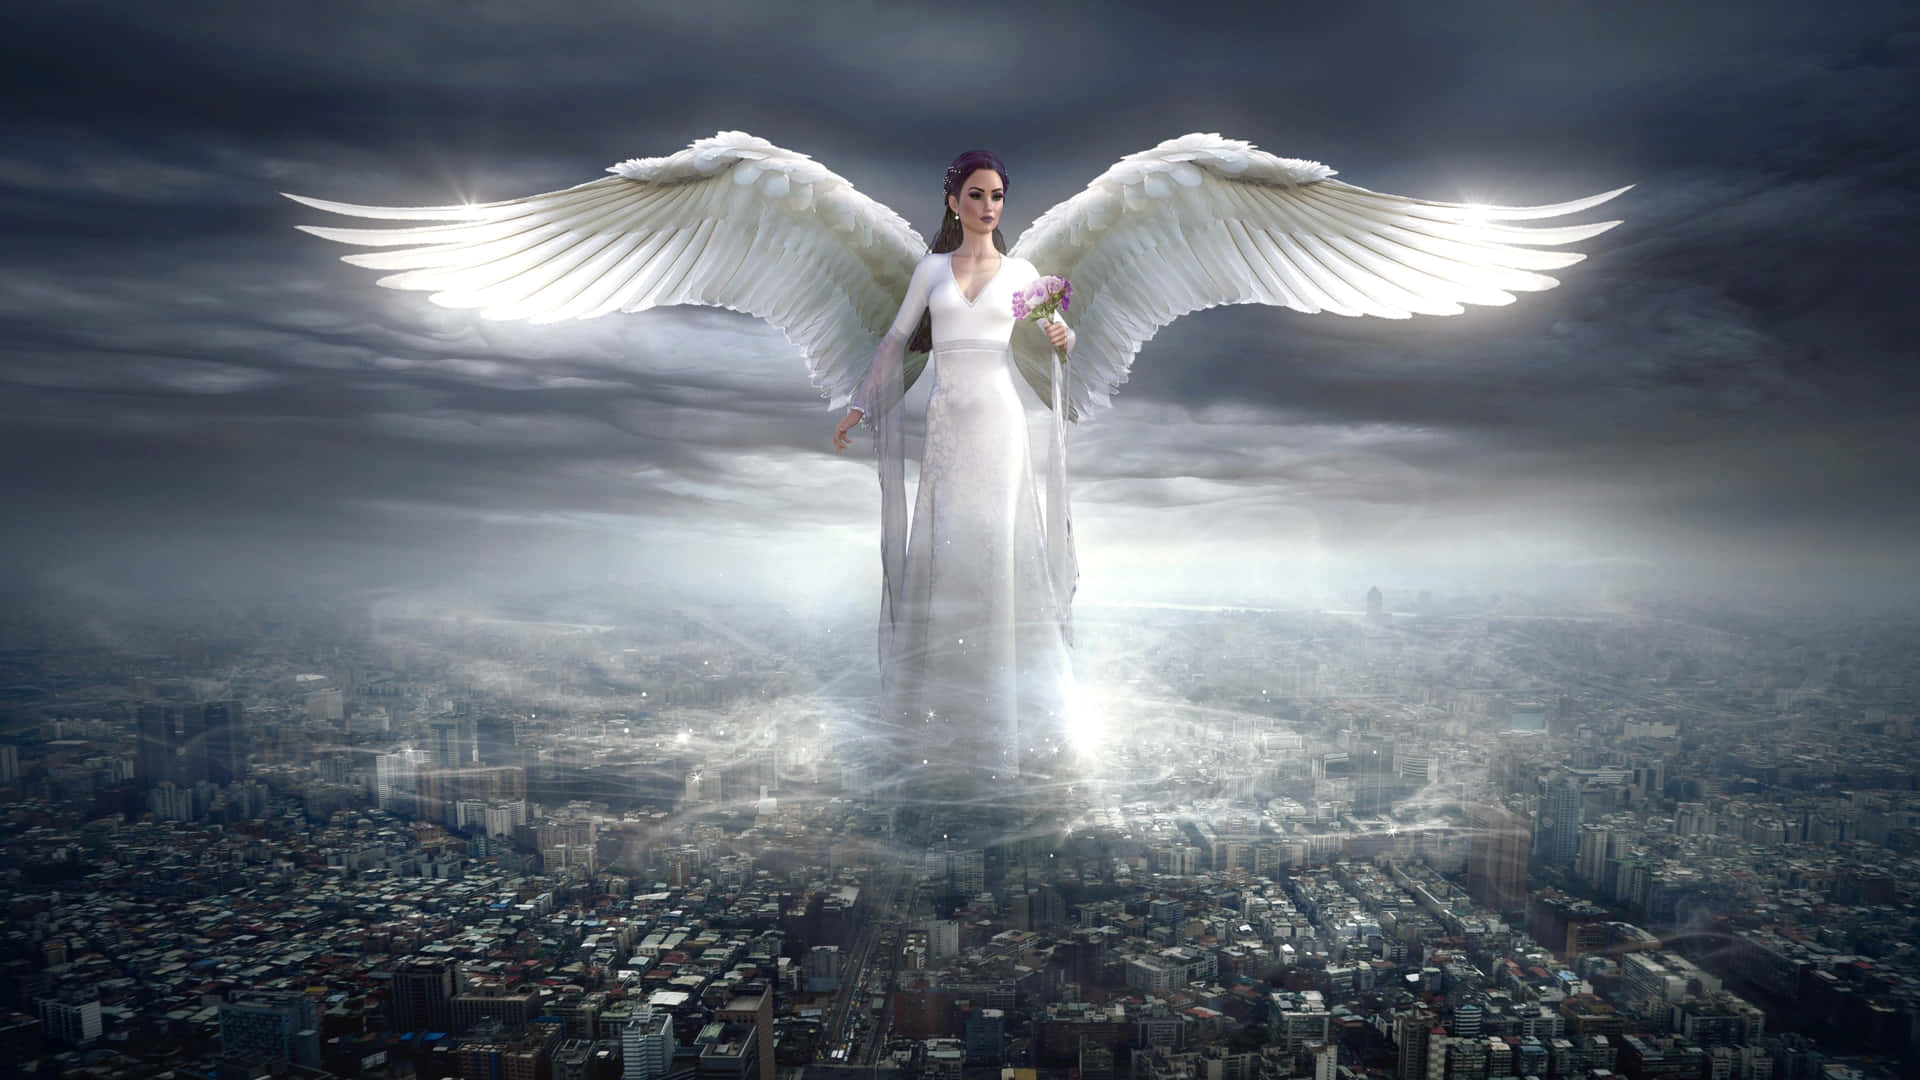 guardian angels background